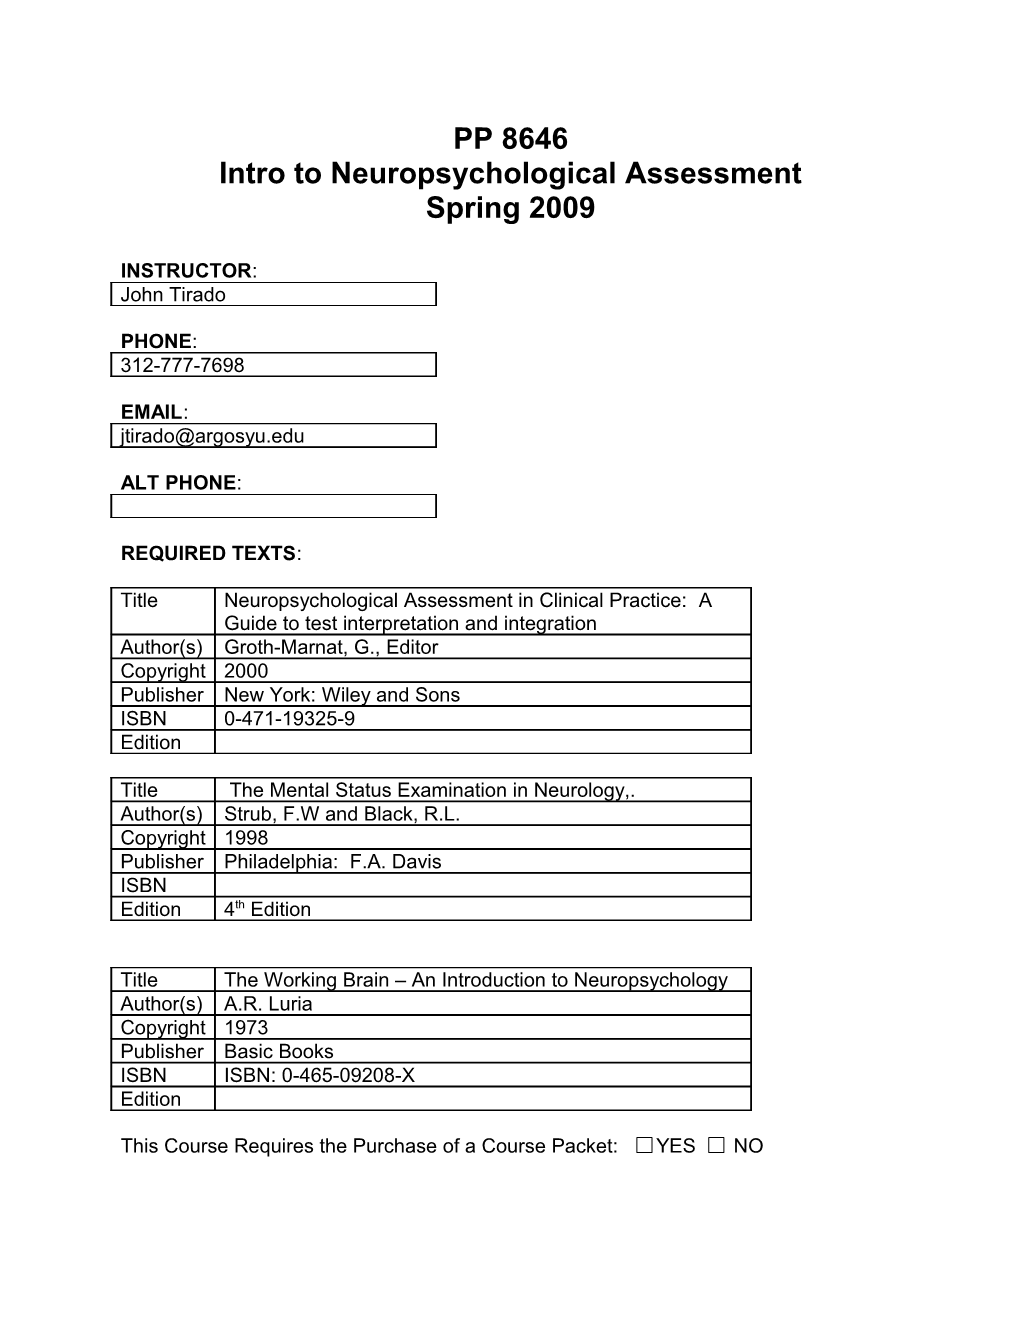 Intro to Neuropsychological Assessment